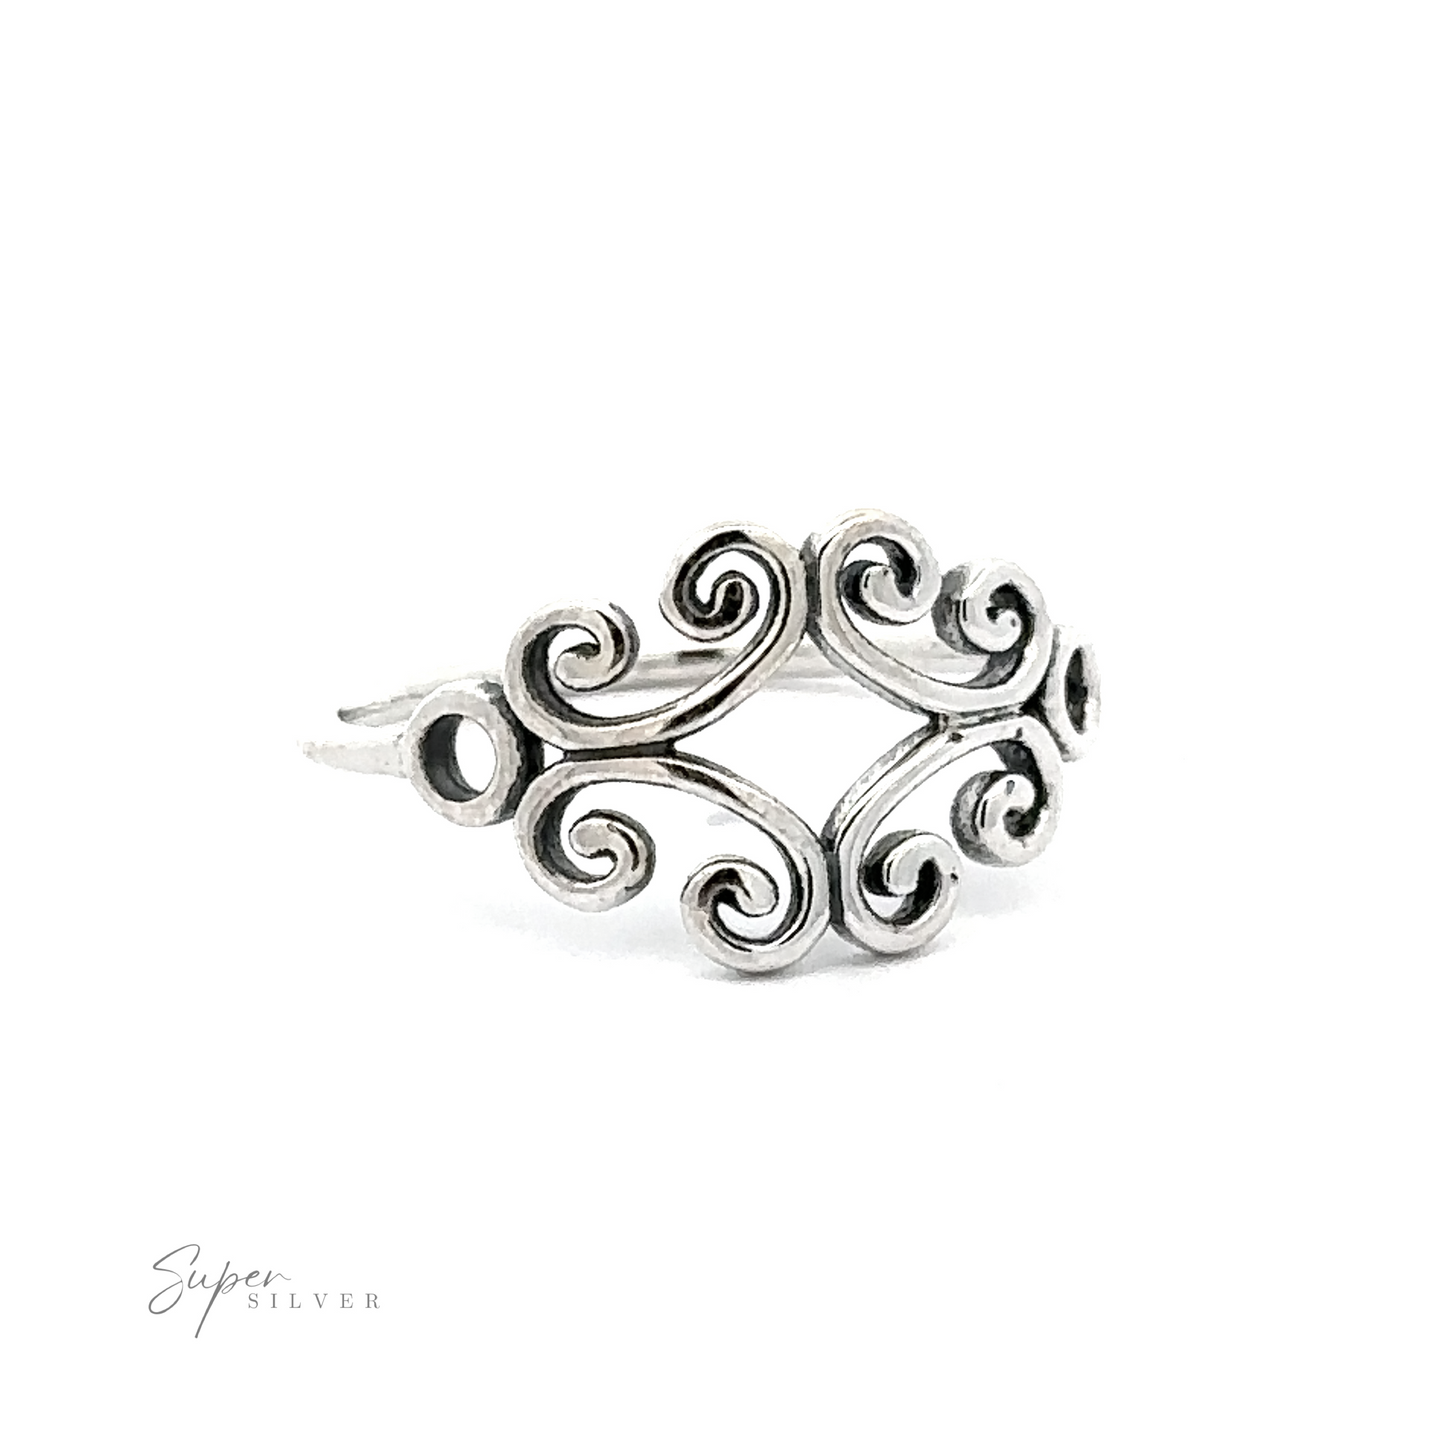 A silver Filigree Ring With Spirals.